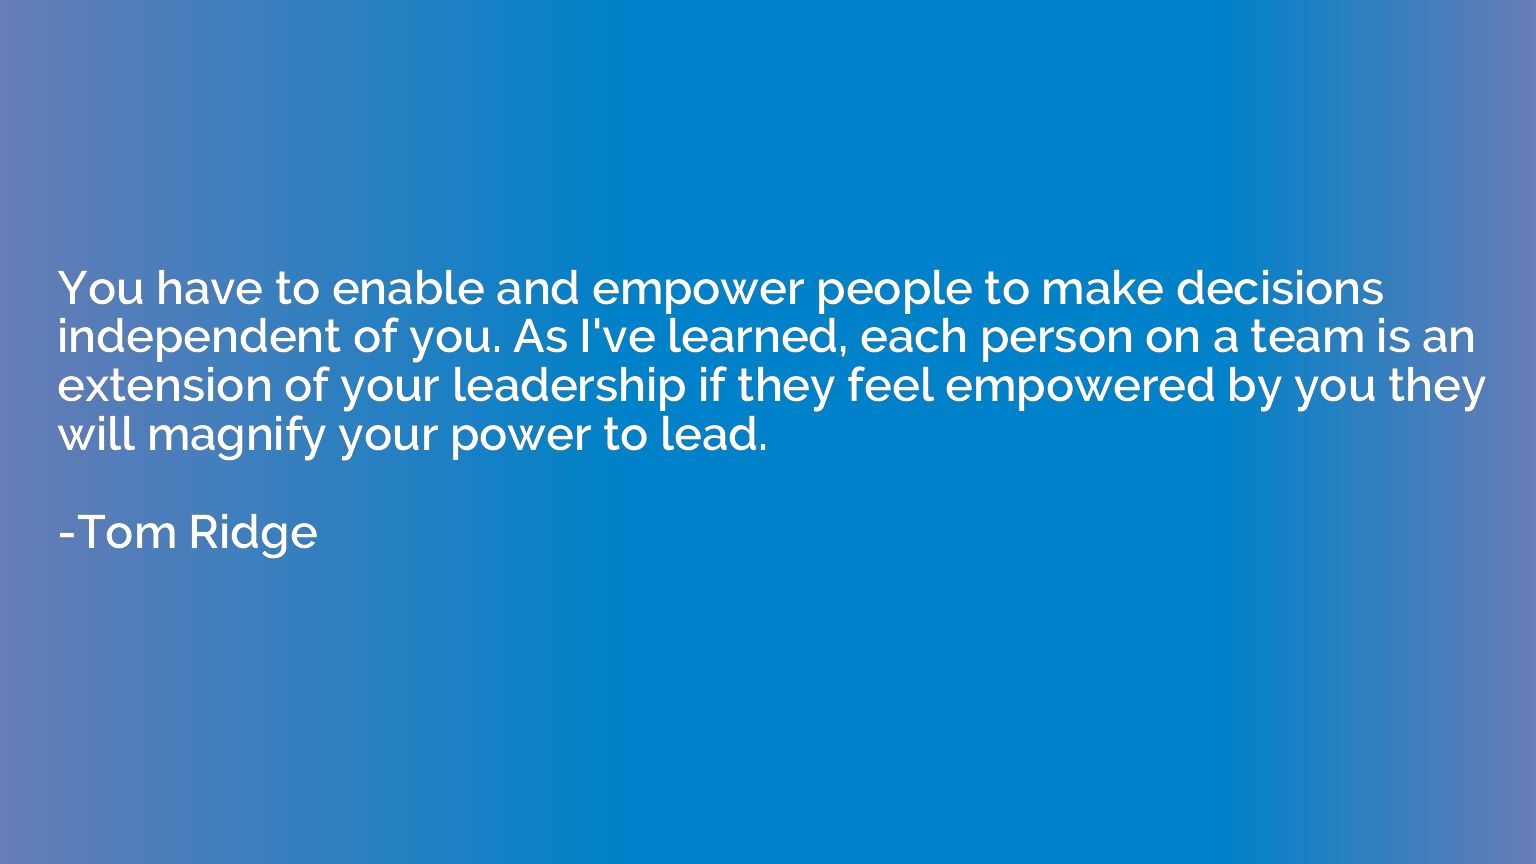 You have to enable and empower people to make decisions inde